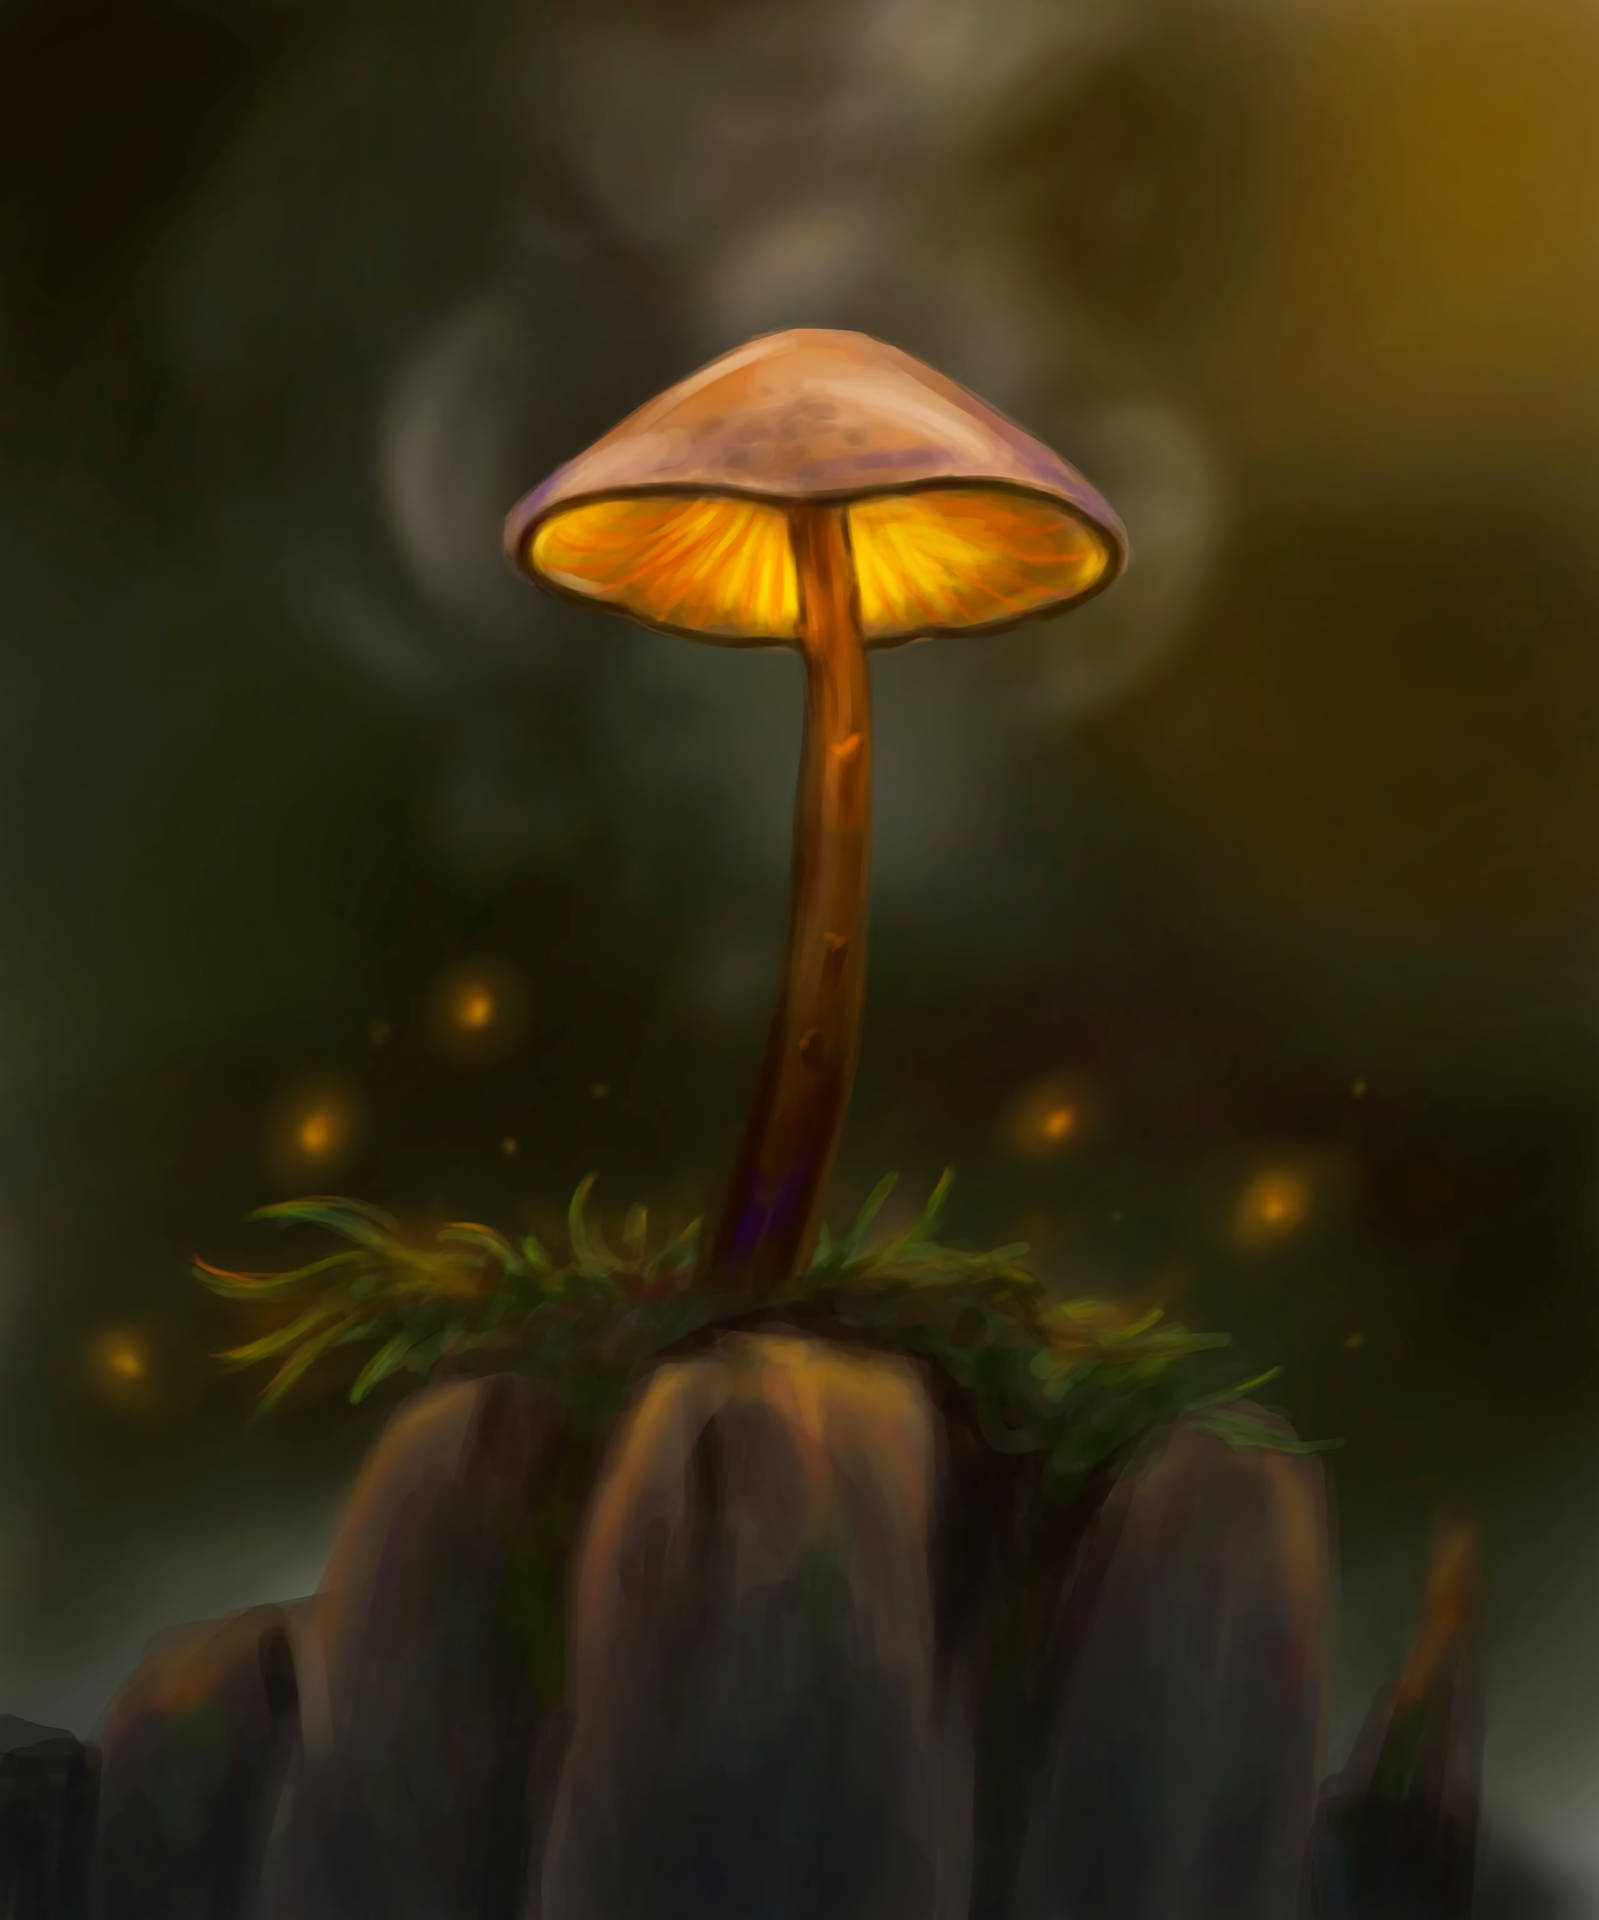 Let your imagination soar with these magical mushrooms. Wallpaper